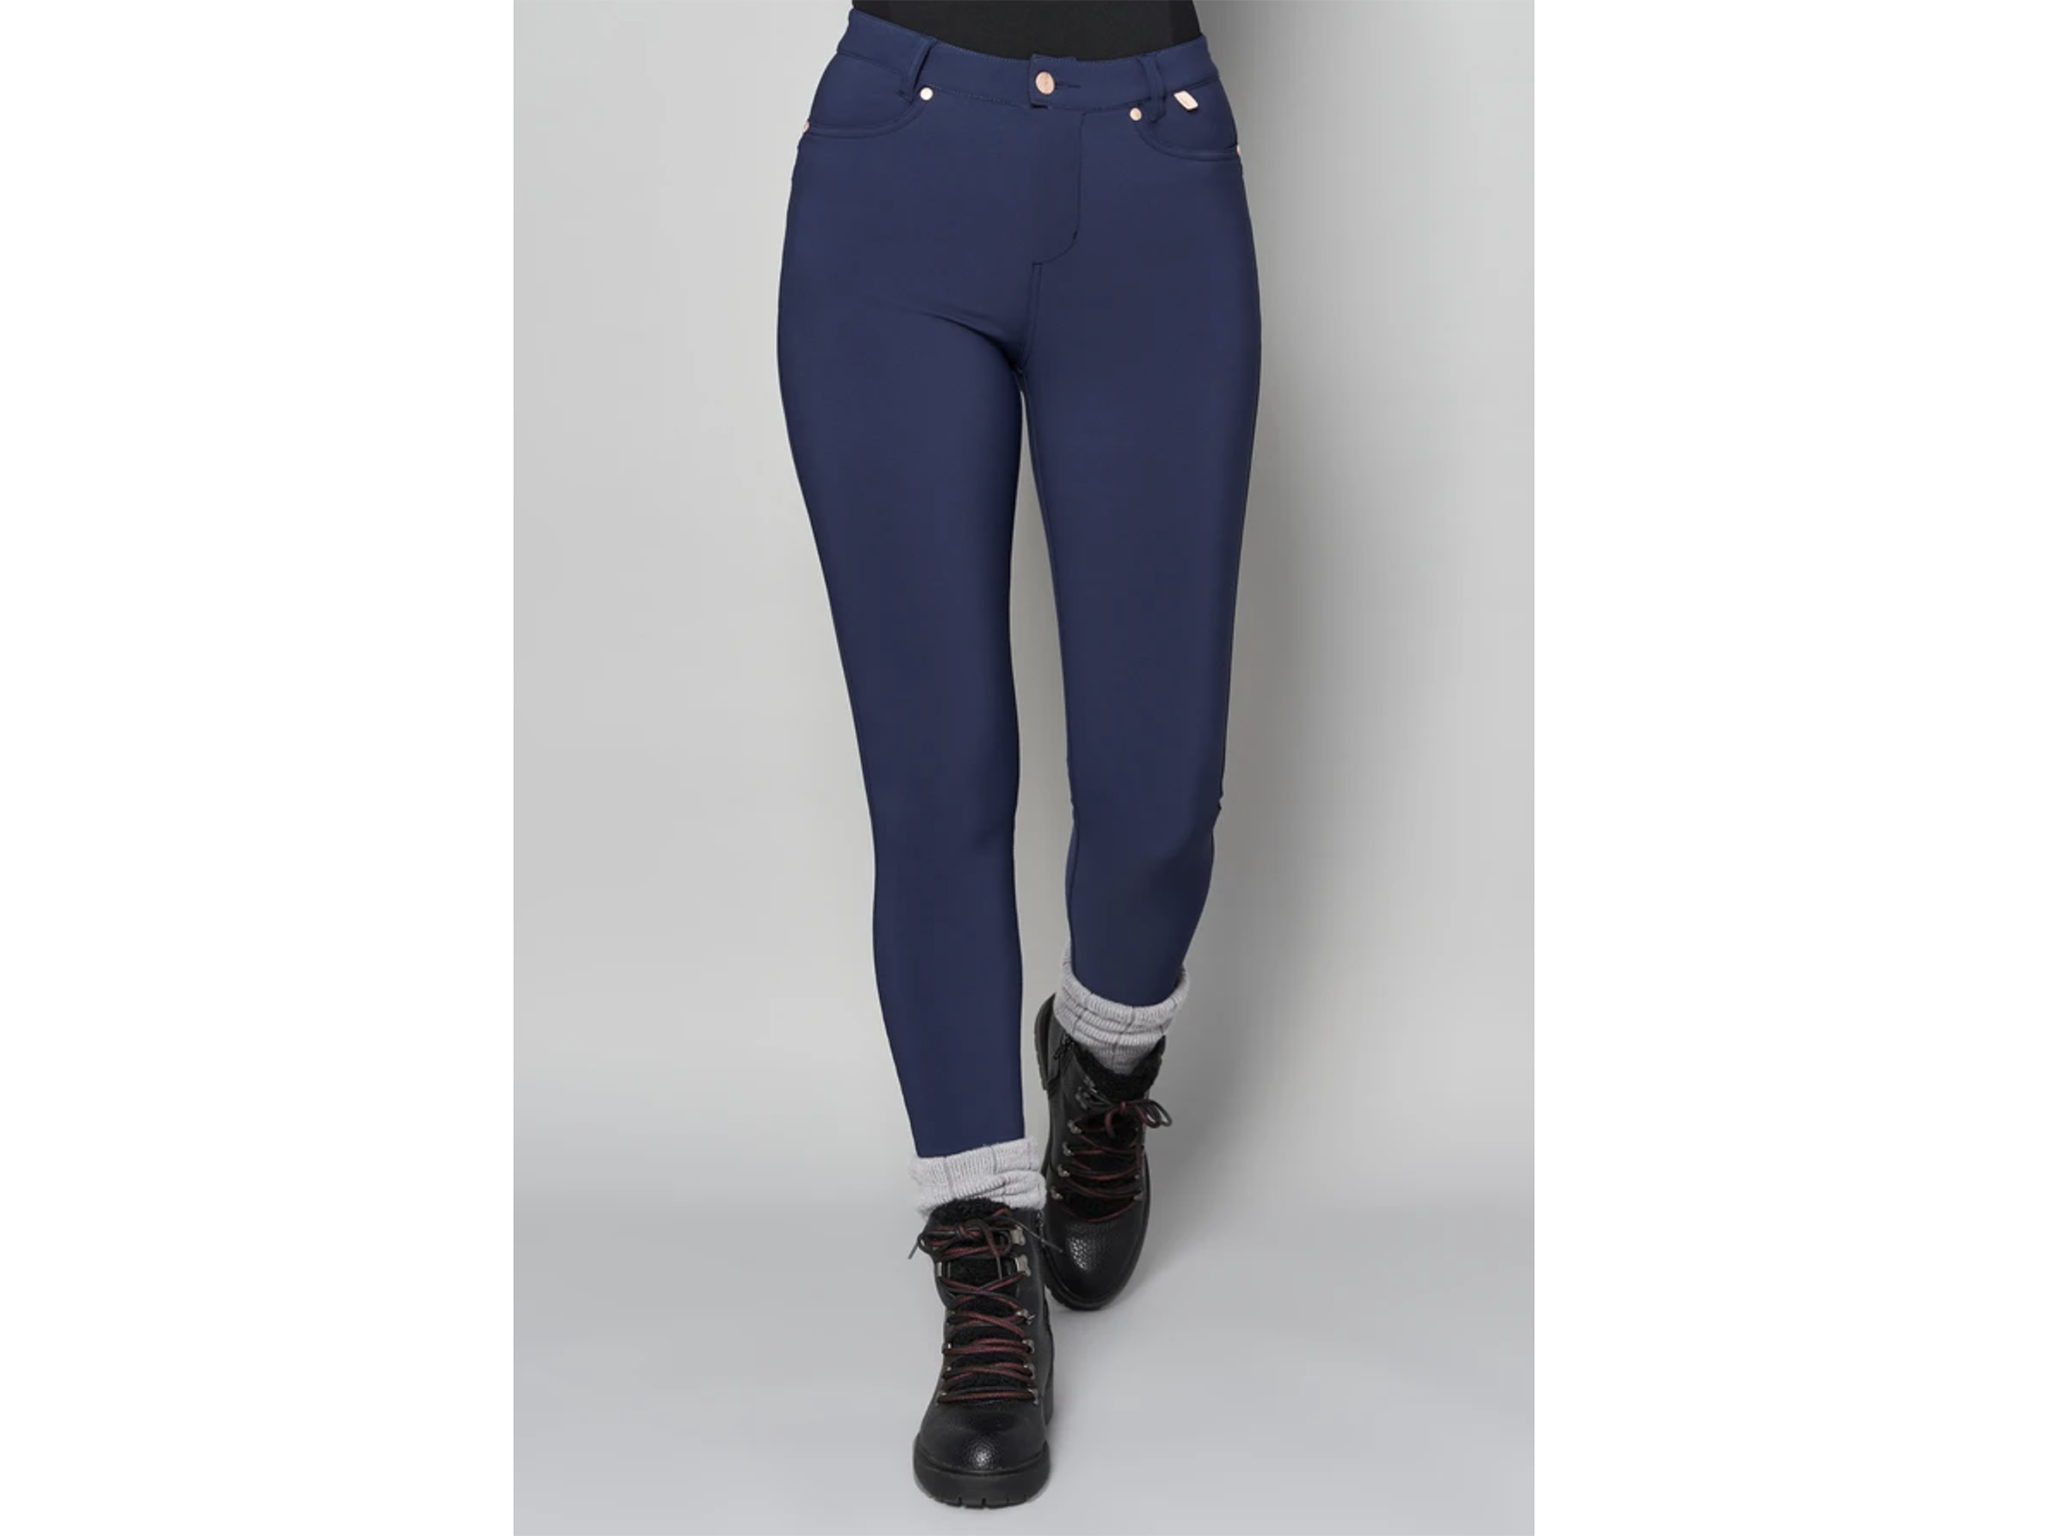 ACAI Outdoorwear: The Skinny Outdoor Jeans 